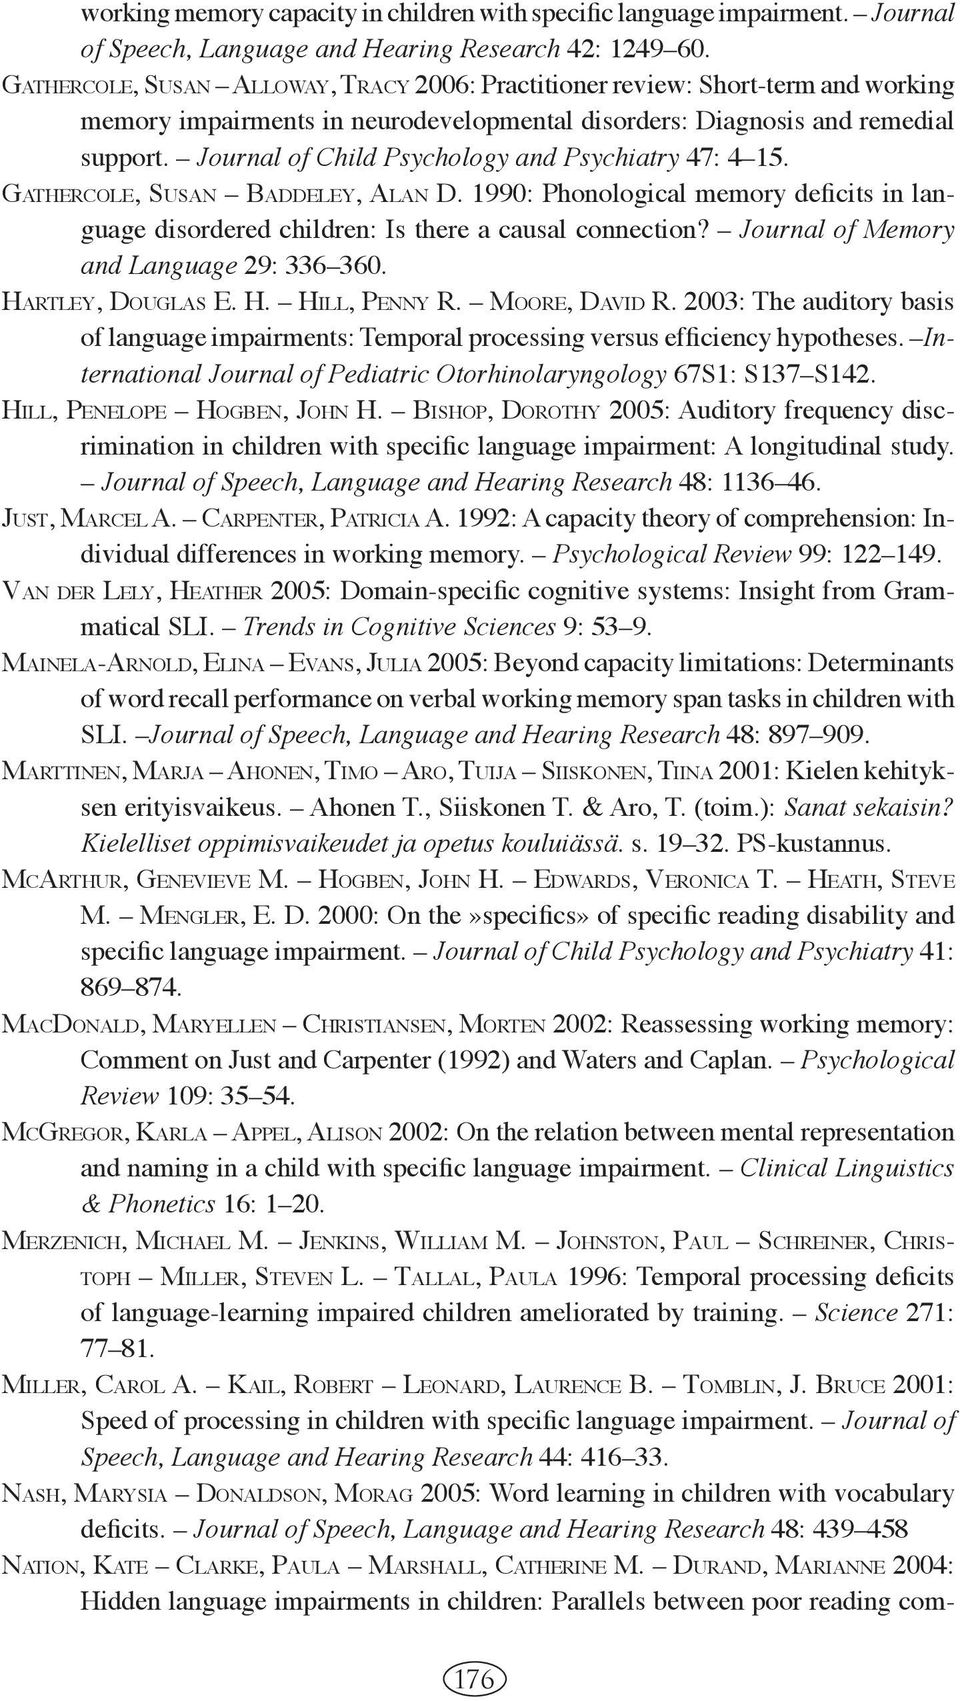 Journal of Child Psychology and Psychiatry 47: 4 15. GATHERCOLE, SUSAN BADDELEY, ALAN D. 1990: Phonological memory deficits in language disordered children: Is there a causal connection?